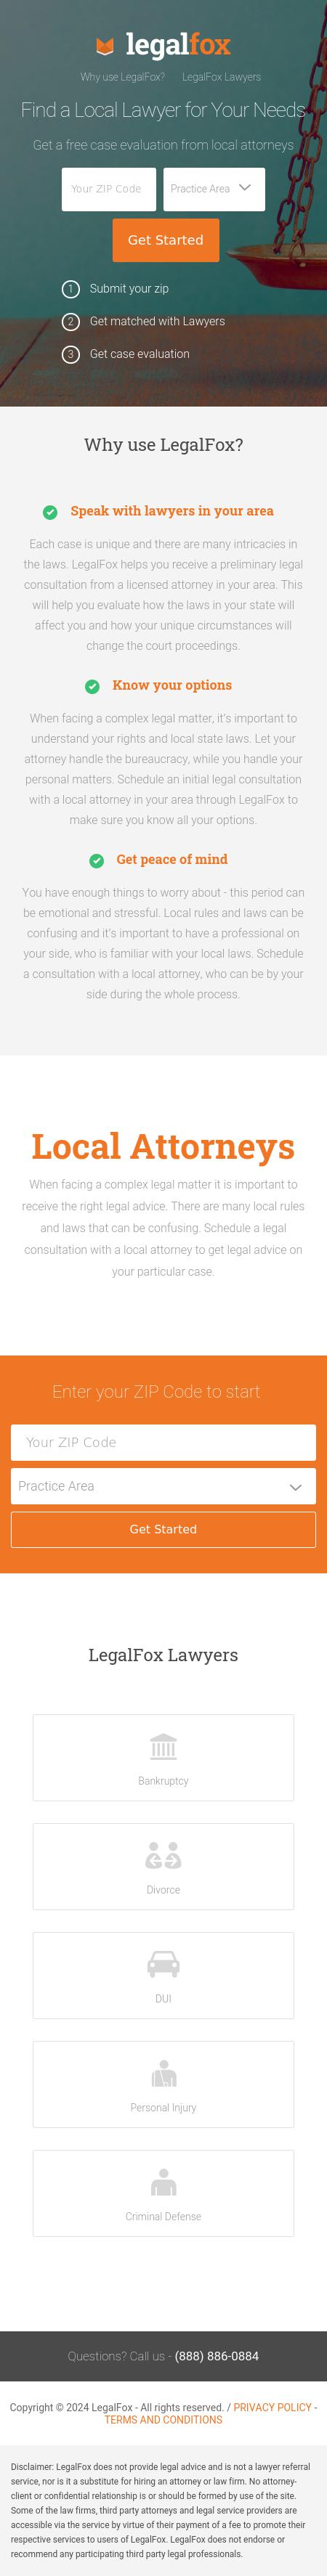 Find a Local Attorney - Athens GA Lawyers